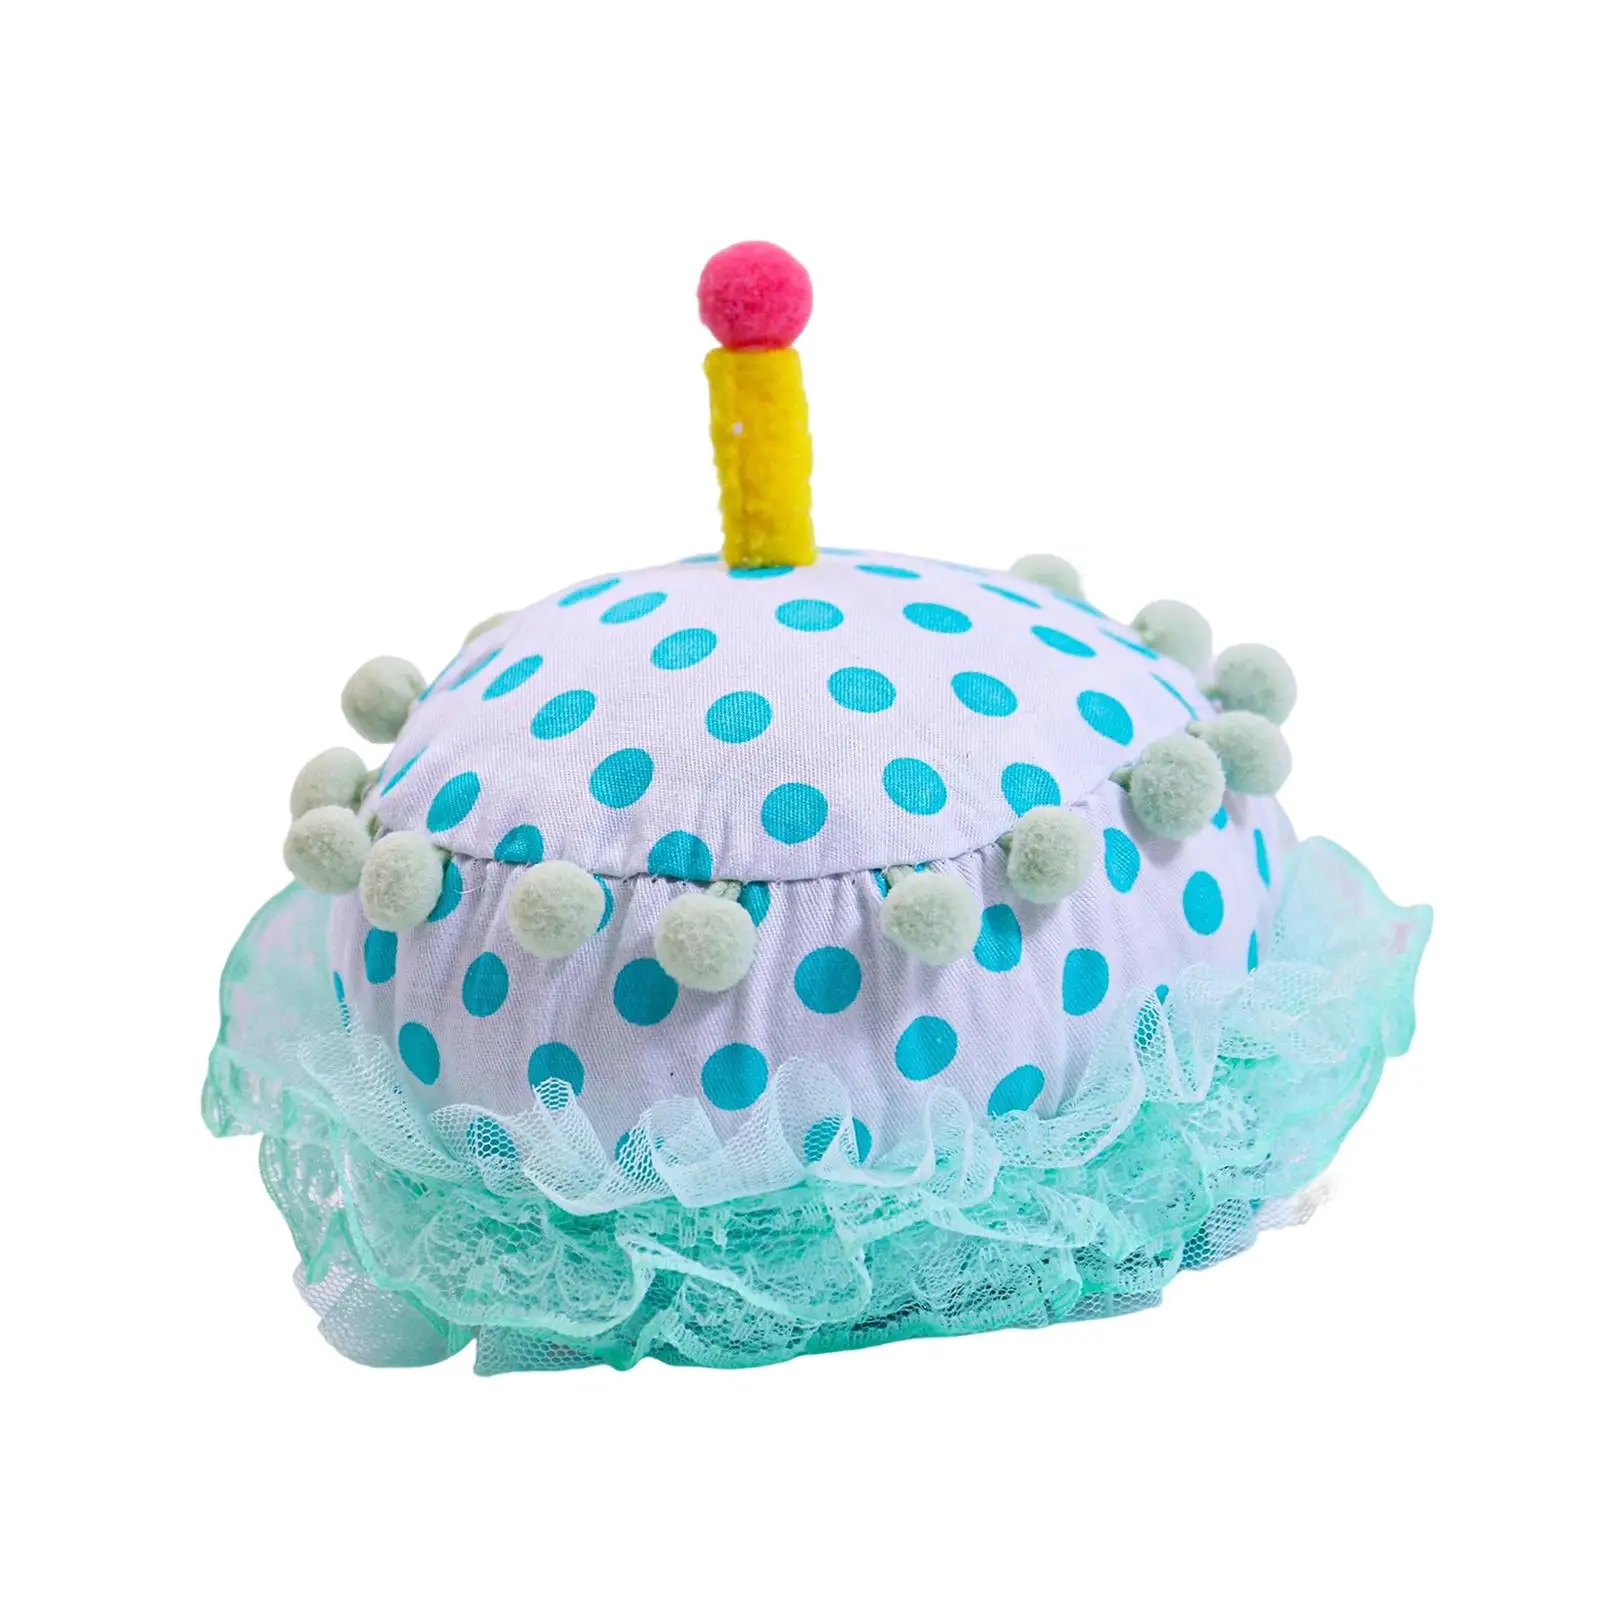 Cute Happy Birthday cakes top Hat Washable for Small Medium Dogs Kids Kitten